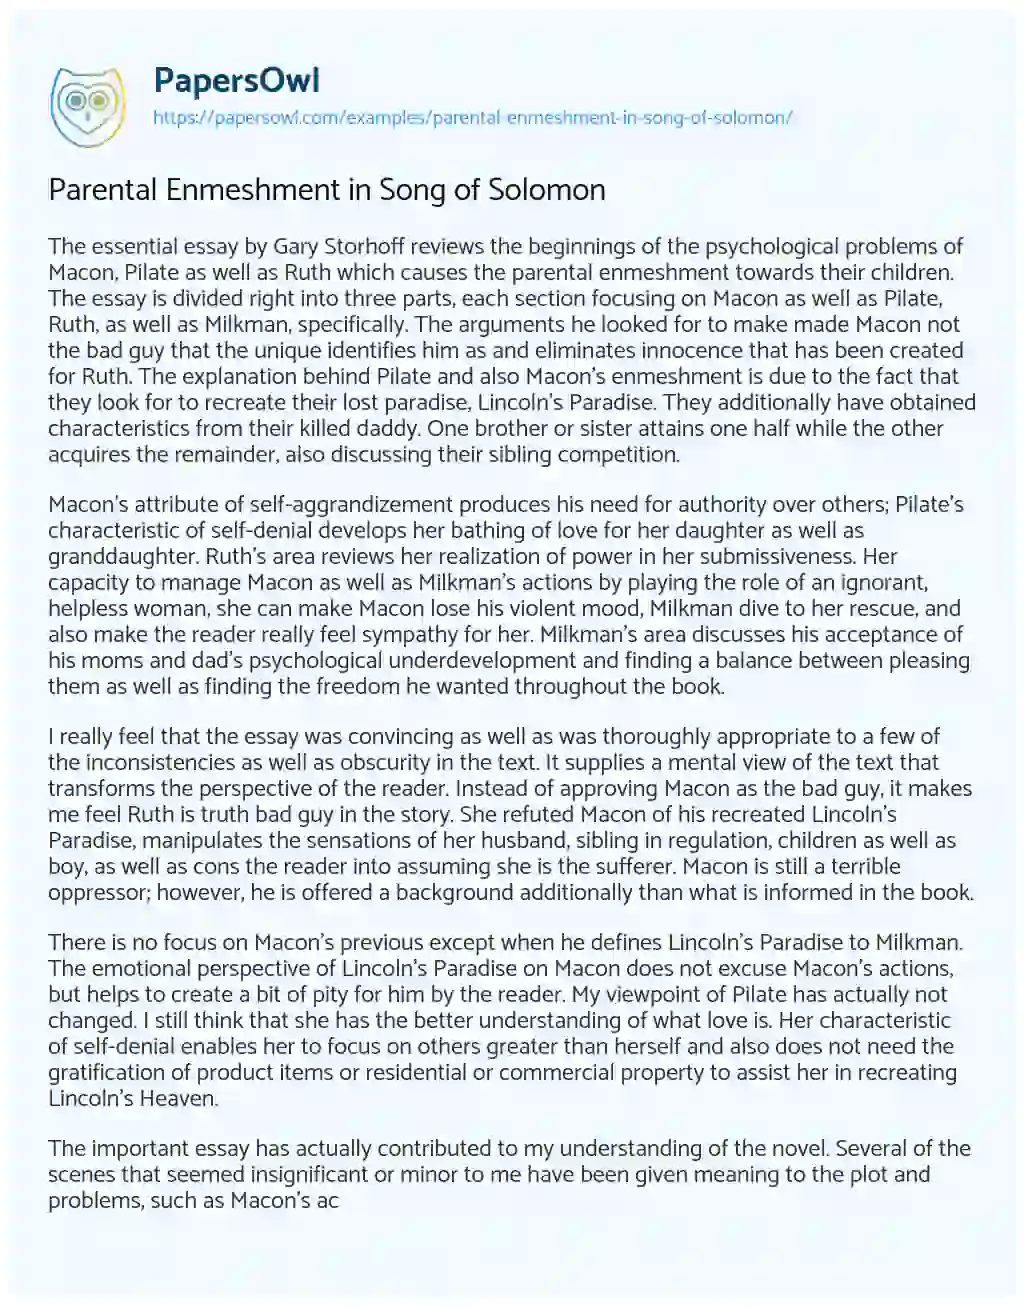 Essay on Parental Enmeshment in Song of Solomon